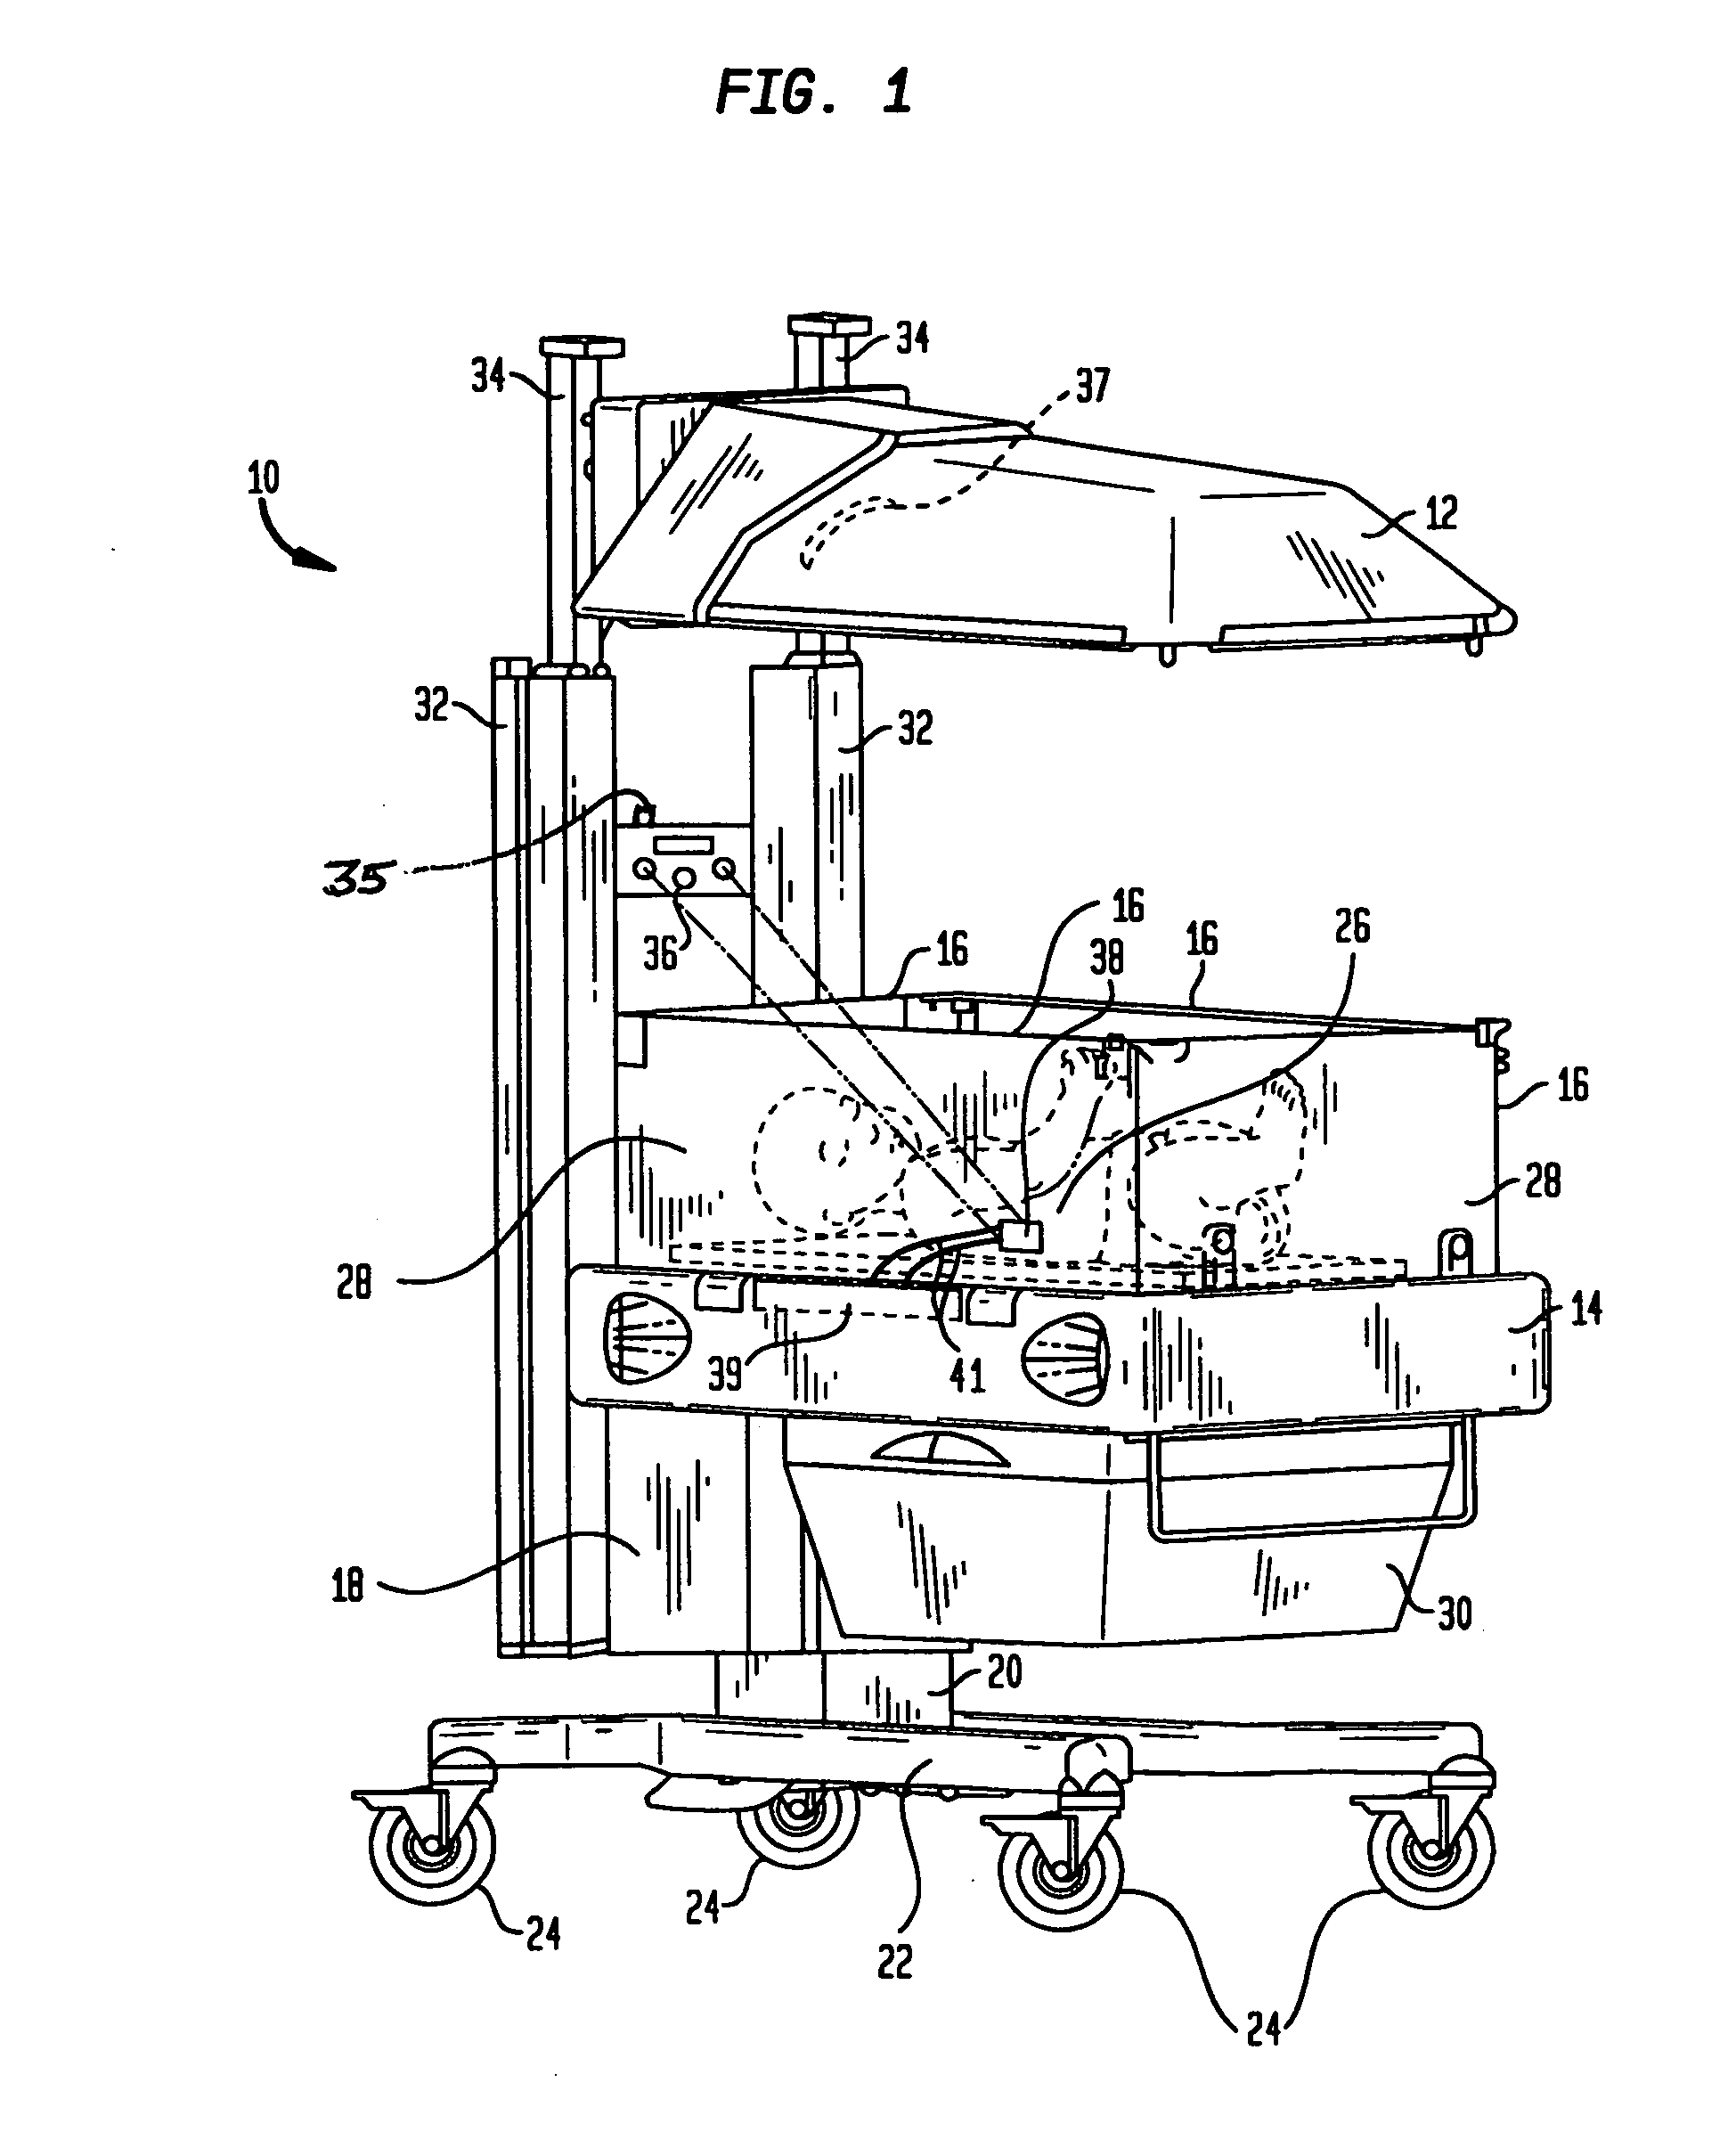 Telemetry sensing system for infant care apparatus